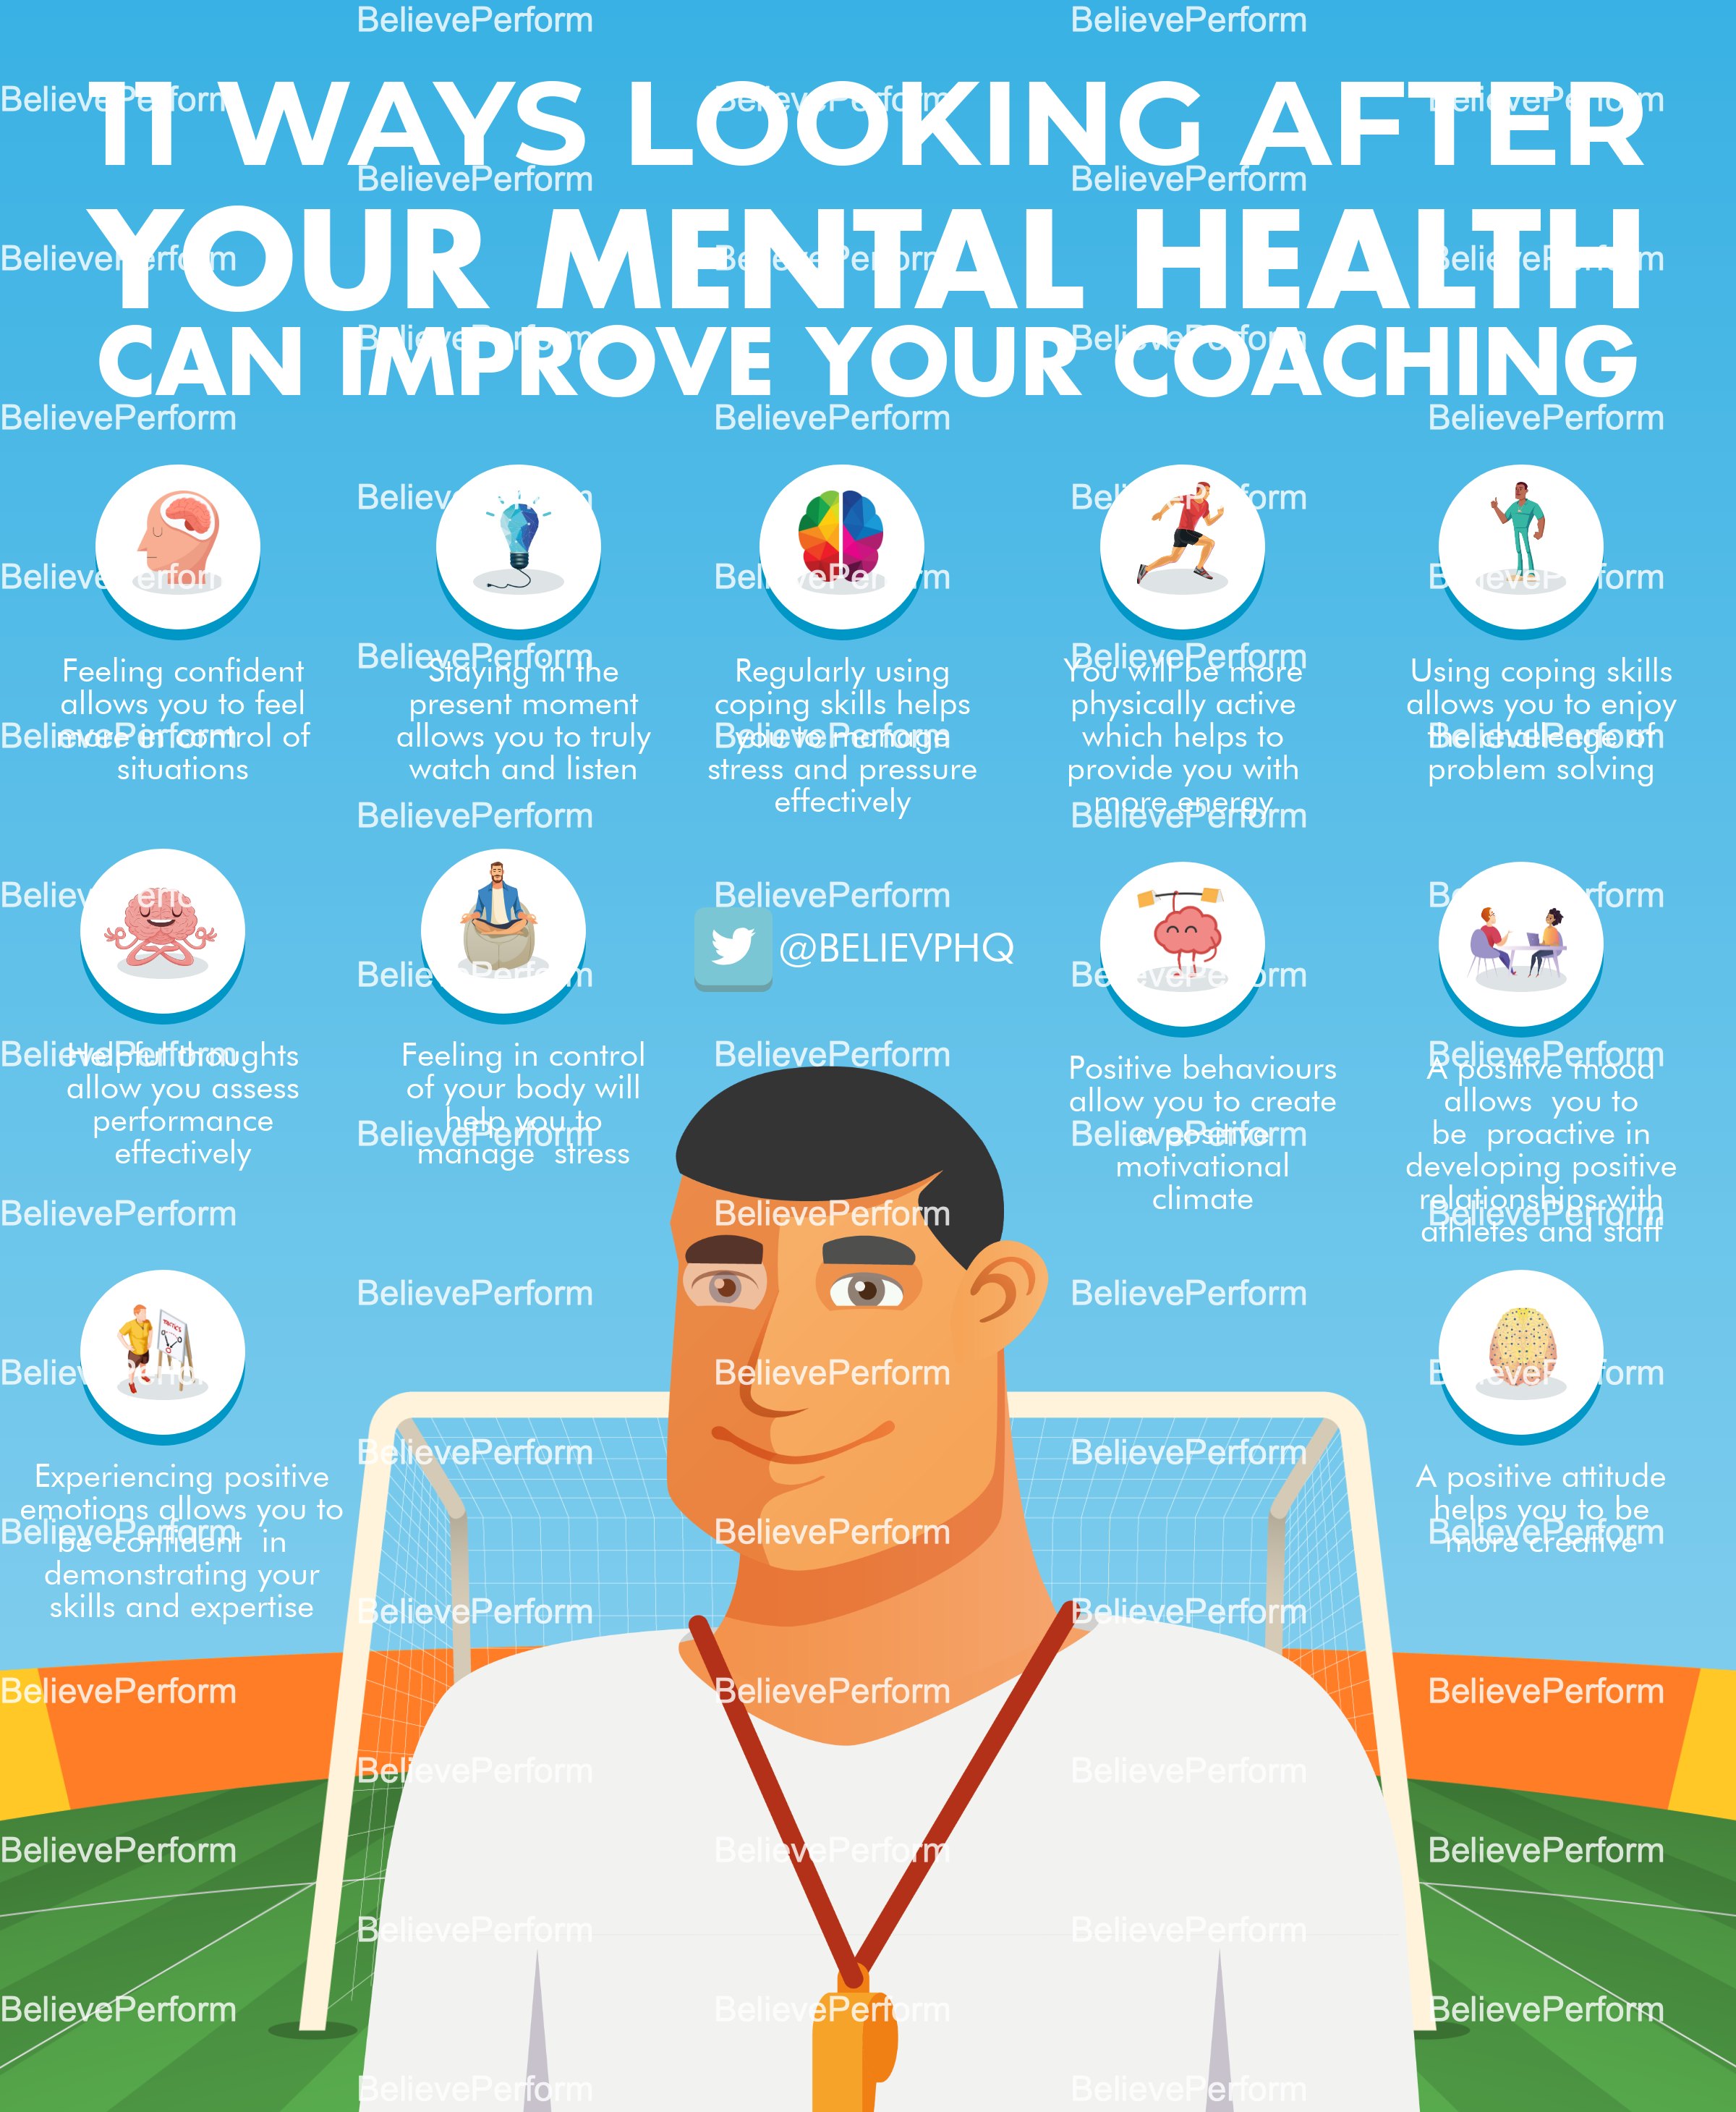 Mental Health: Want to tackle mental health issues? Sports can be